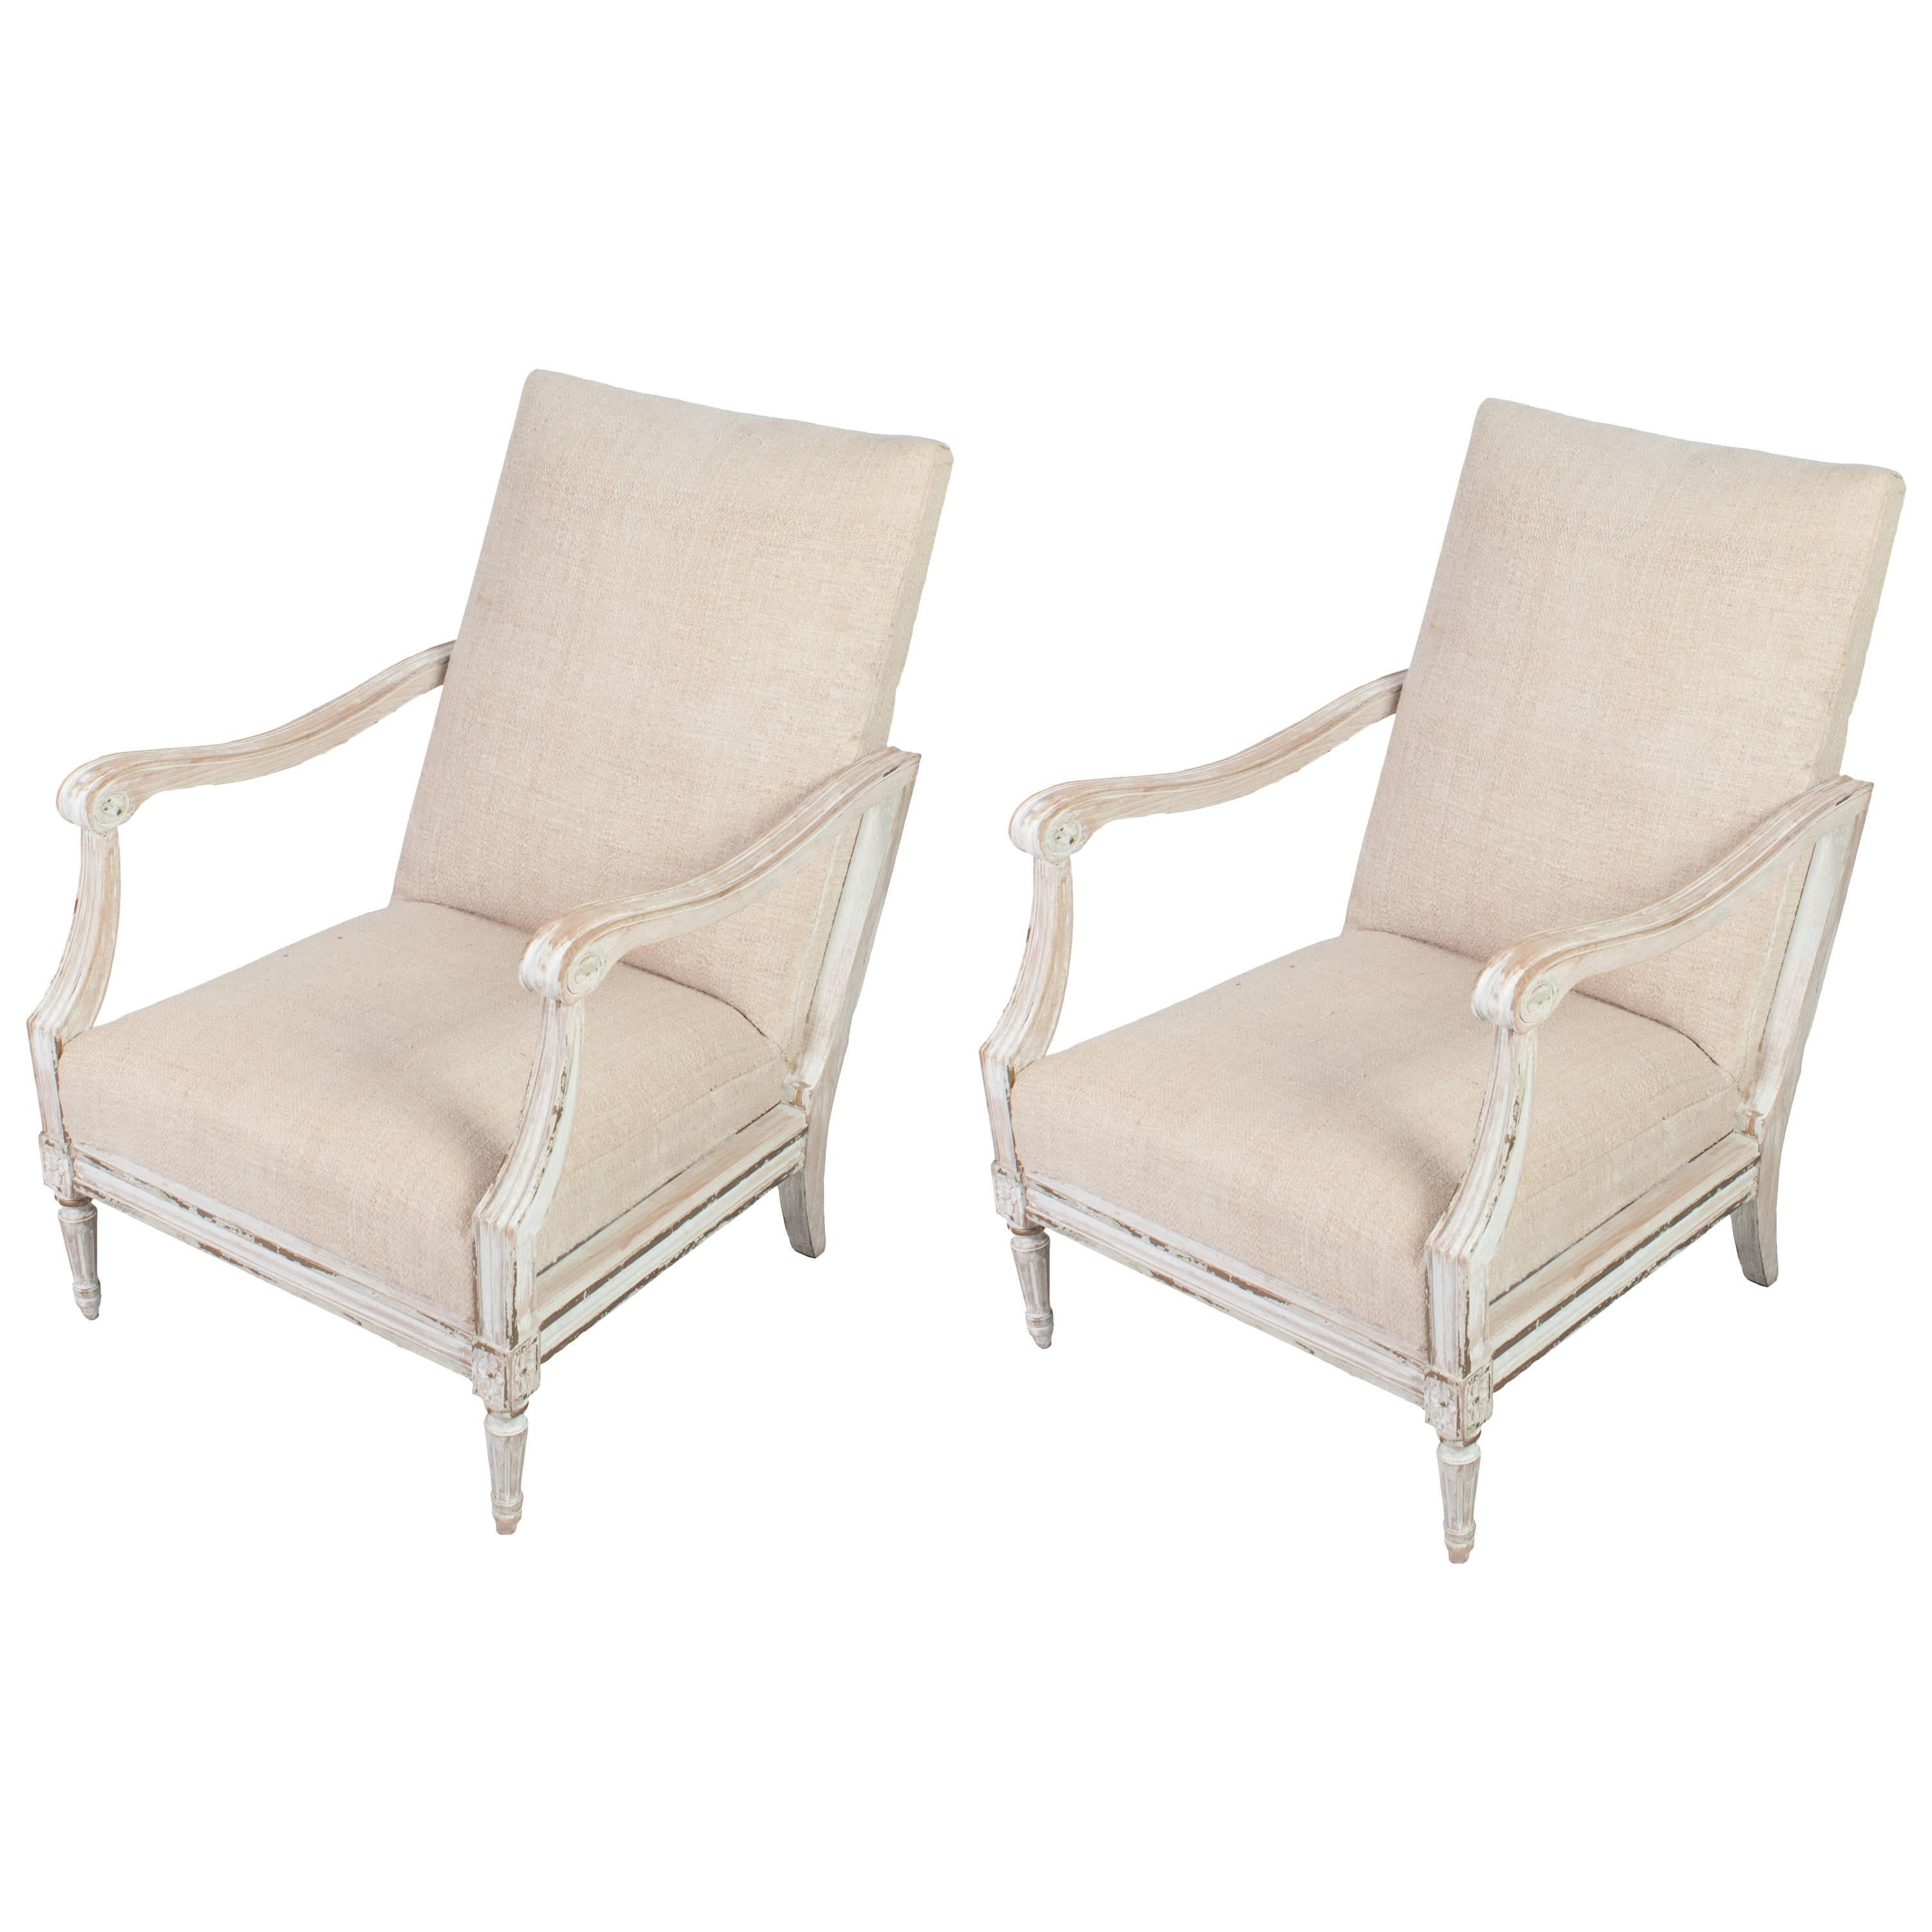 Pair of White Painted Fauteuils